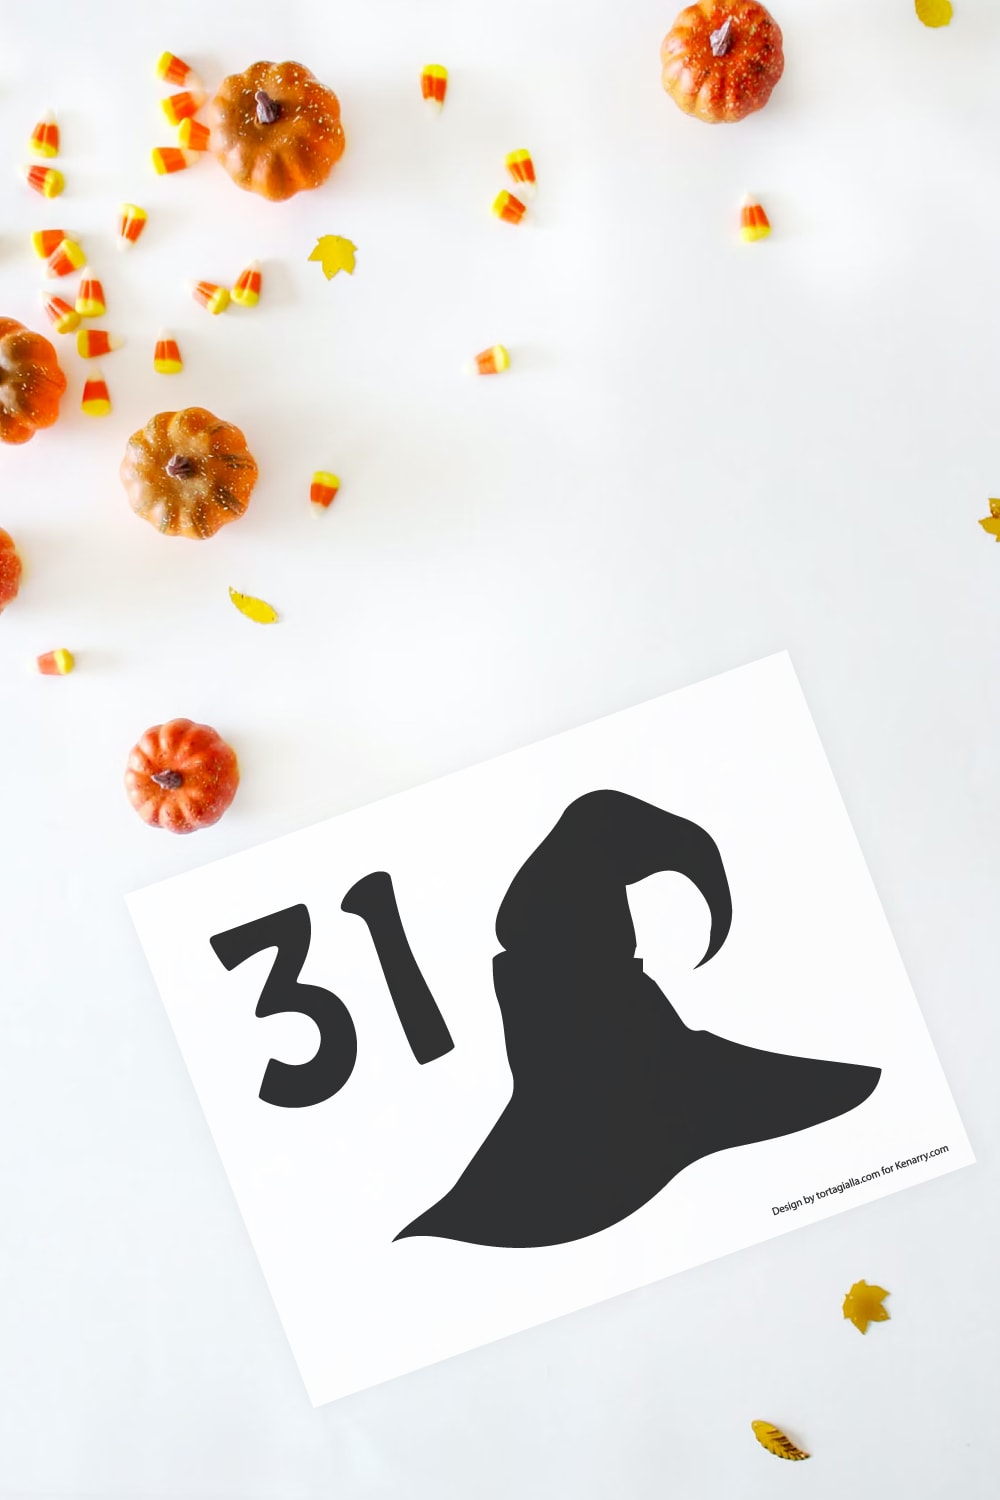 Preview of witch hat with number 31 silhouette pumpkin stencil printable on white background with little pumpkins and candy corn decorative items in upper left corner.